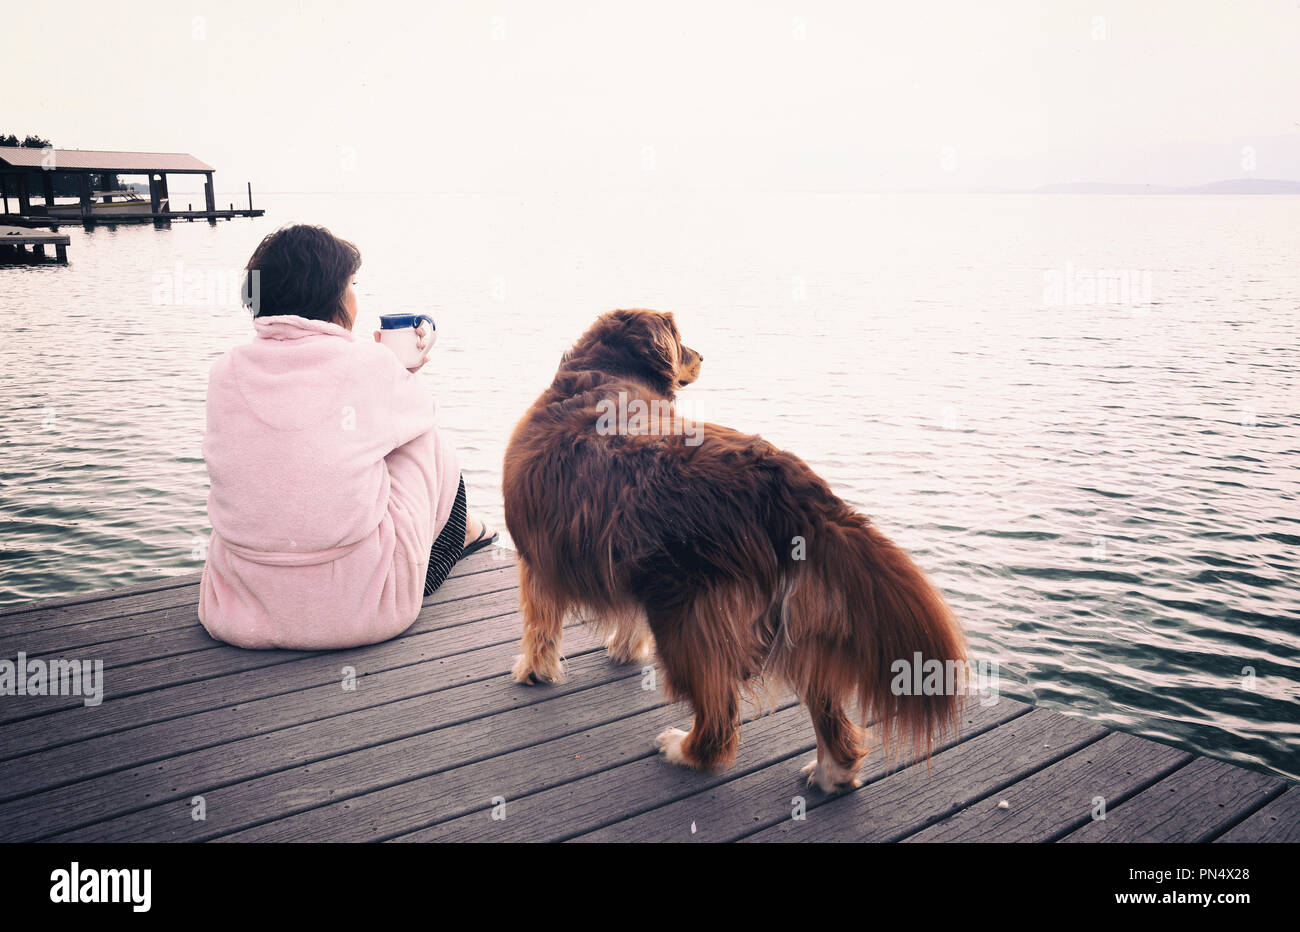 Middle aged caucasian woman and her dog sitting on lakeside dock drinking cup of coffee on a stormy mountain morning Stock Photo